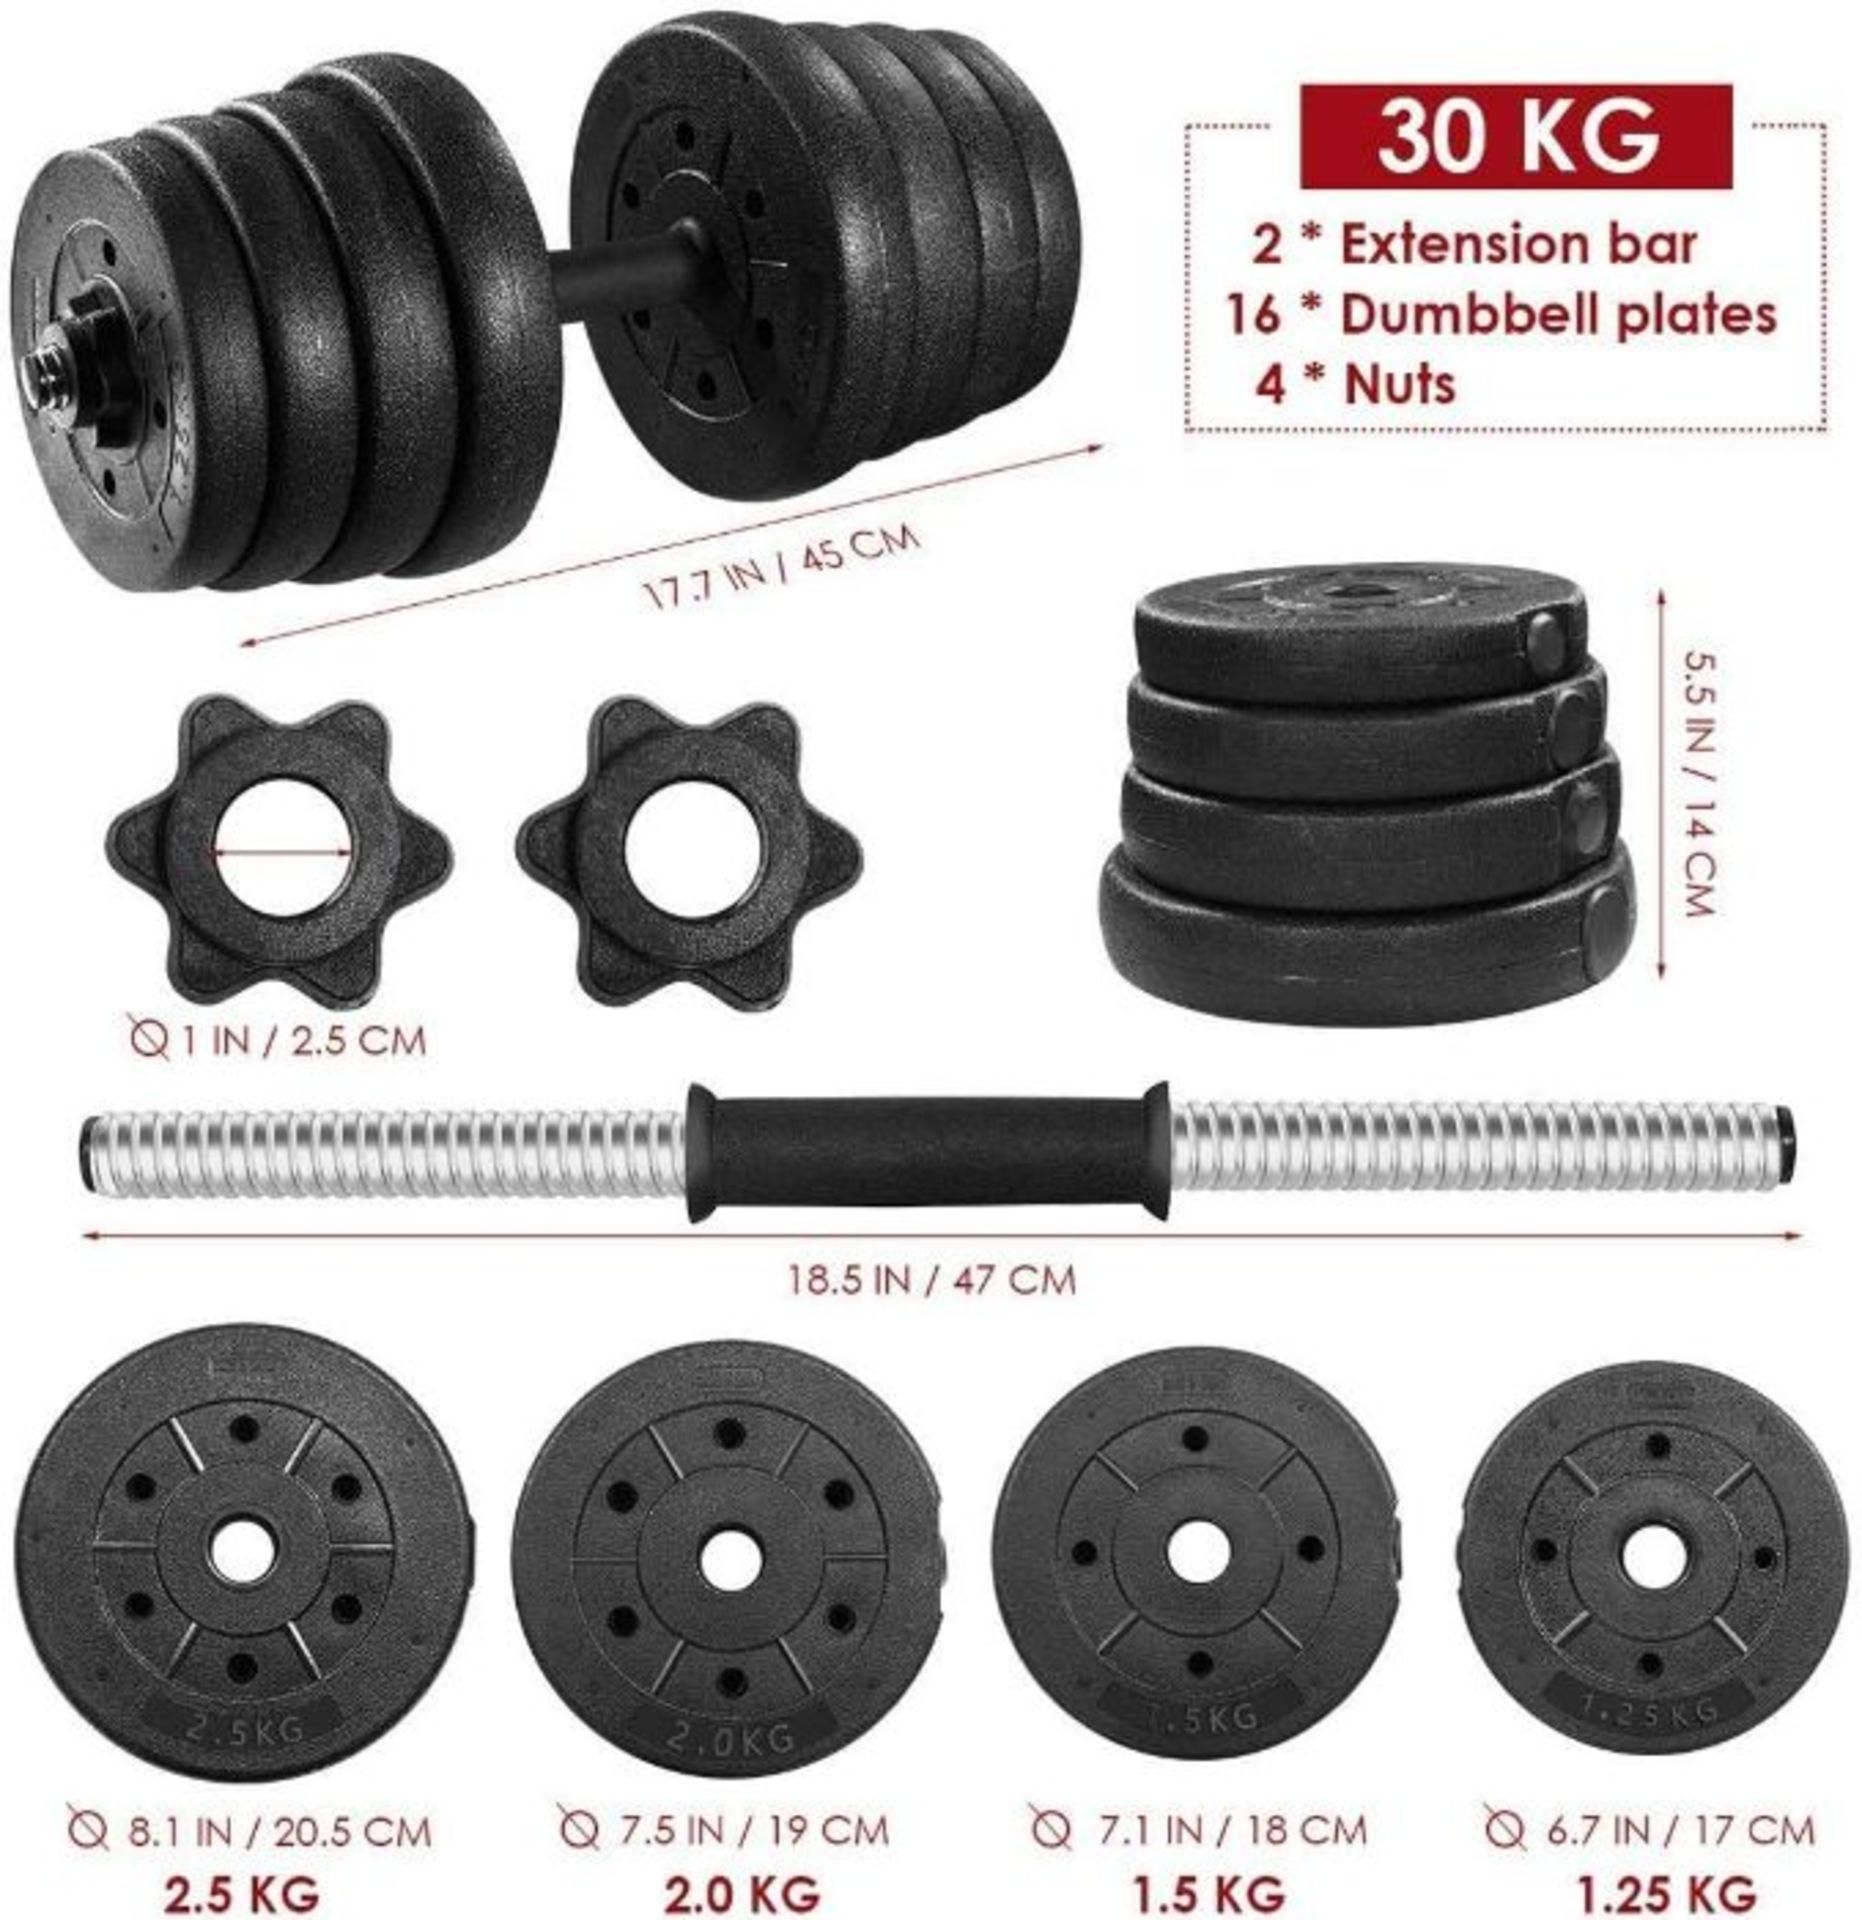 10x Movtotop 30KG adjustable Dumb Bell weight set, new and boxed, we can only find these in - Image 6 of 6